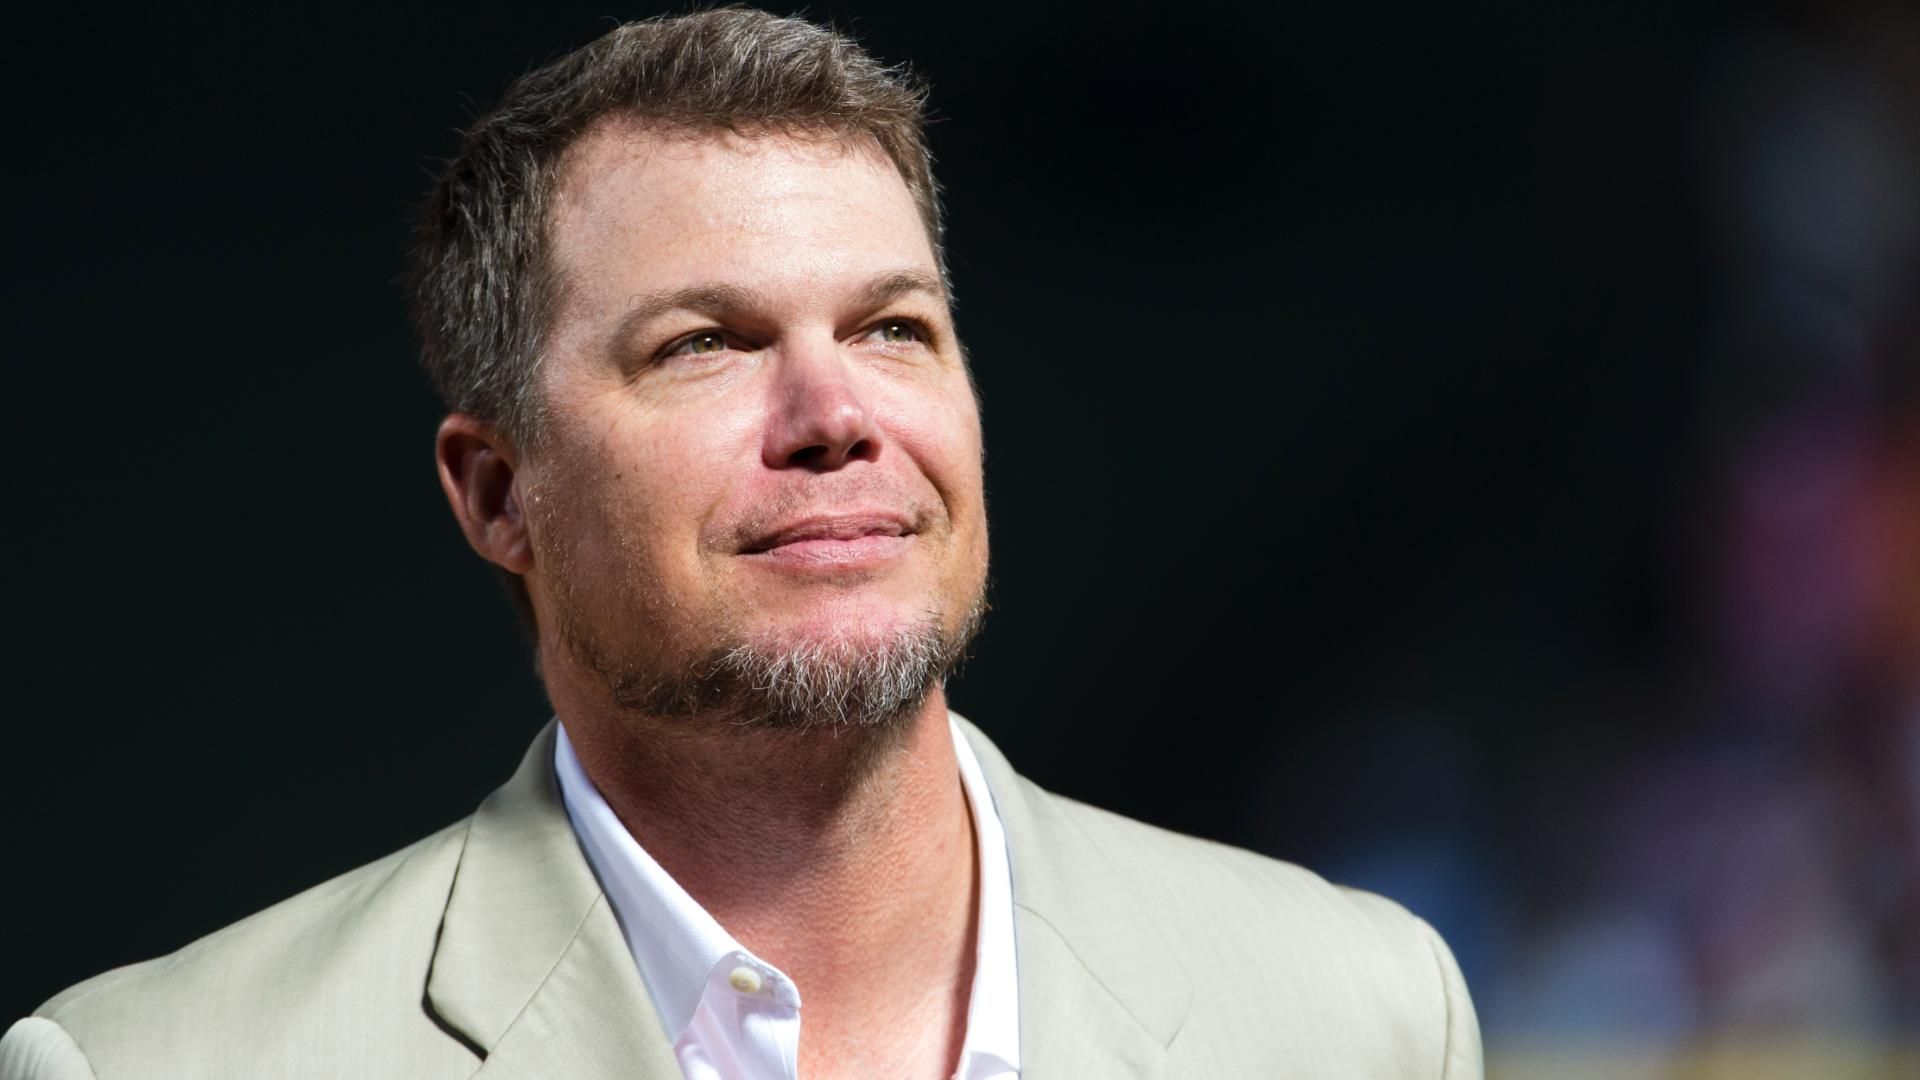 Why Chipper Jones is the ultimate Phillies Villain – NBC Sports